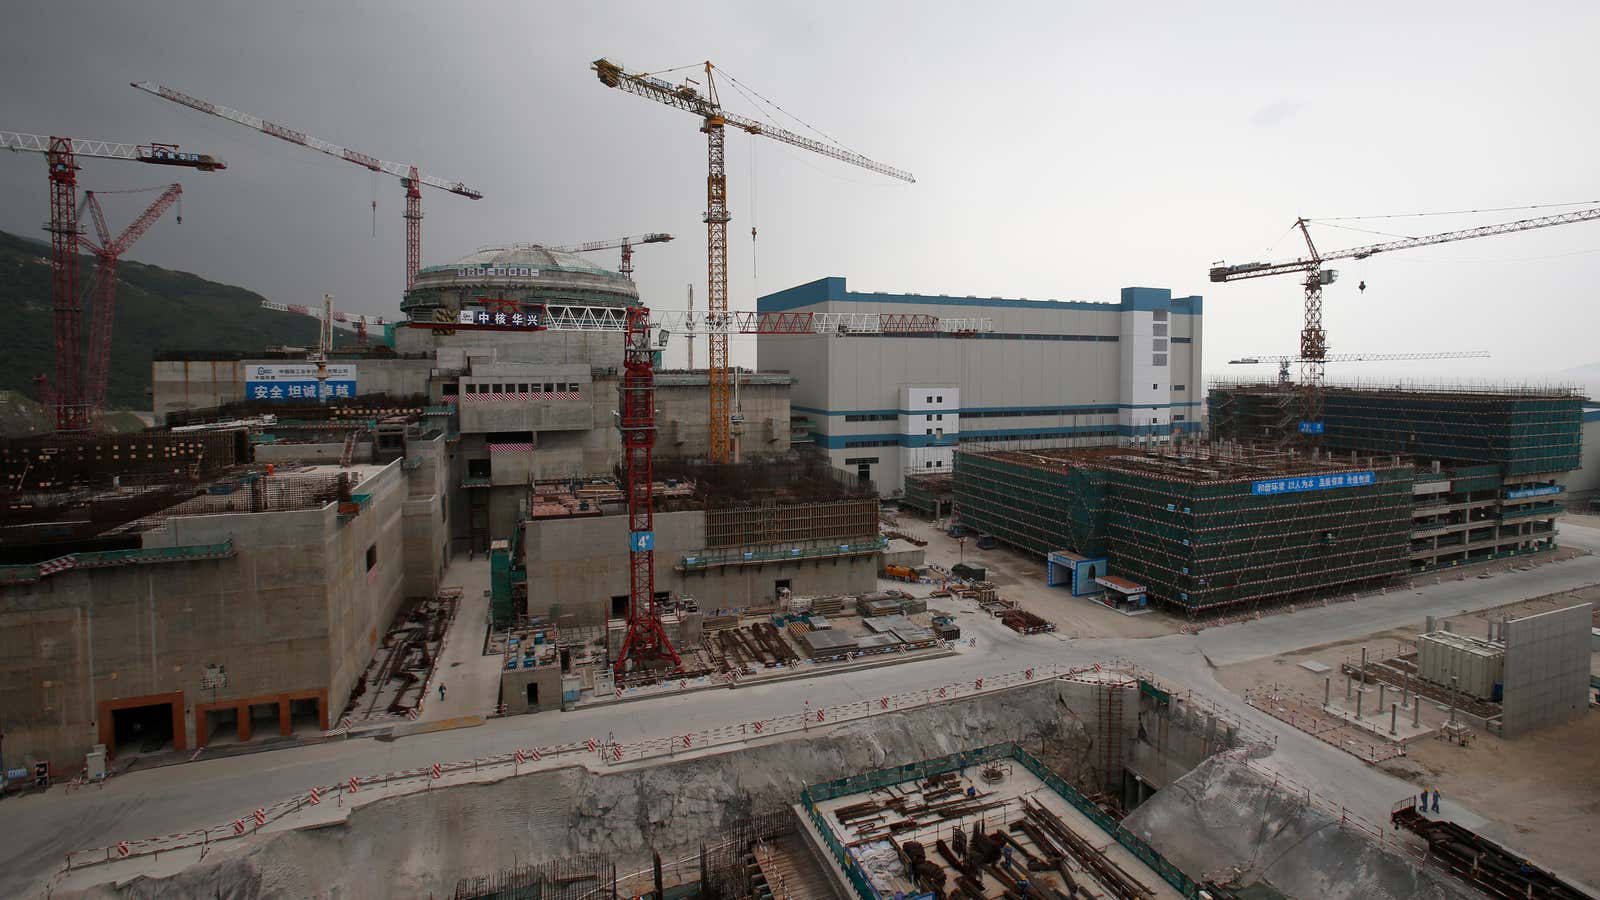 A nuclear reactor under construction in Taishan, China in 2013.